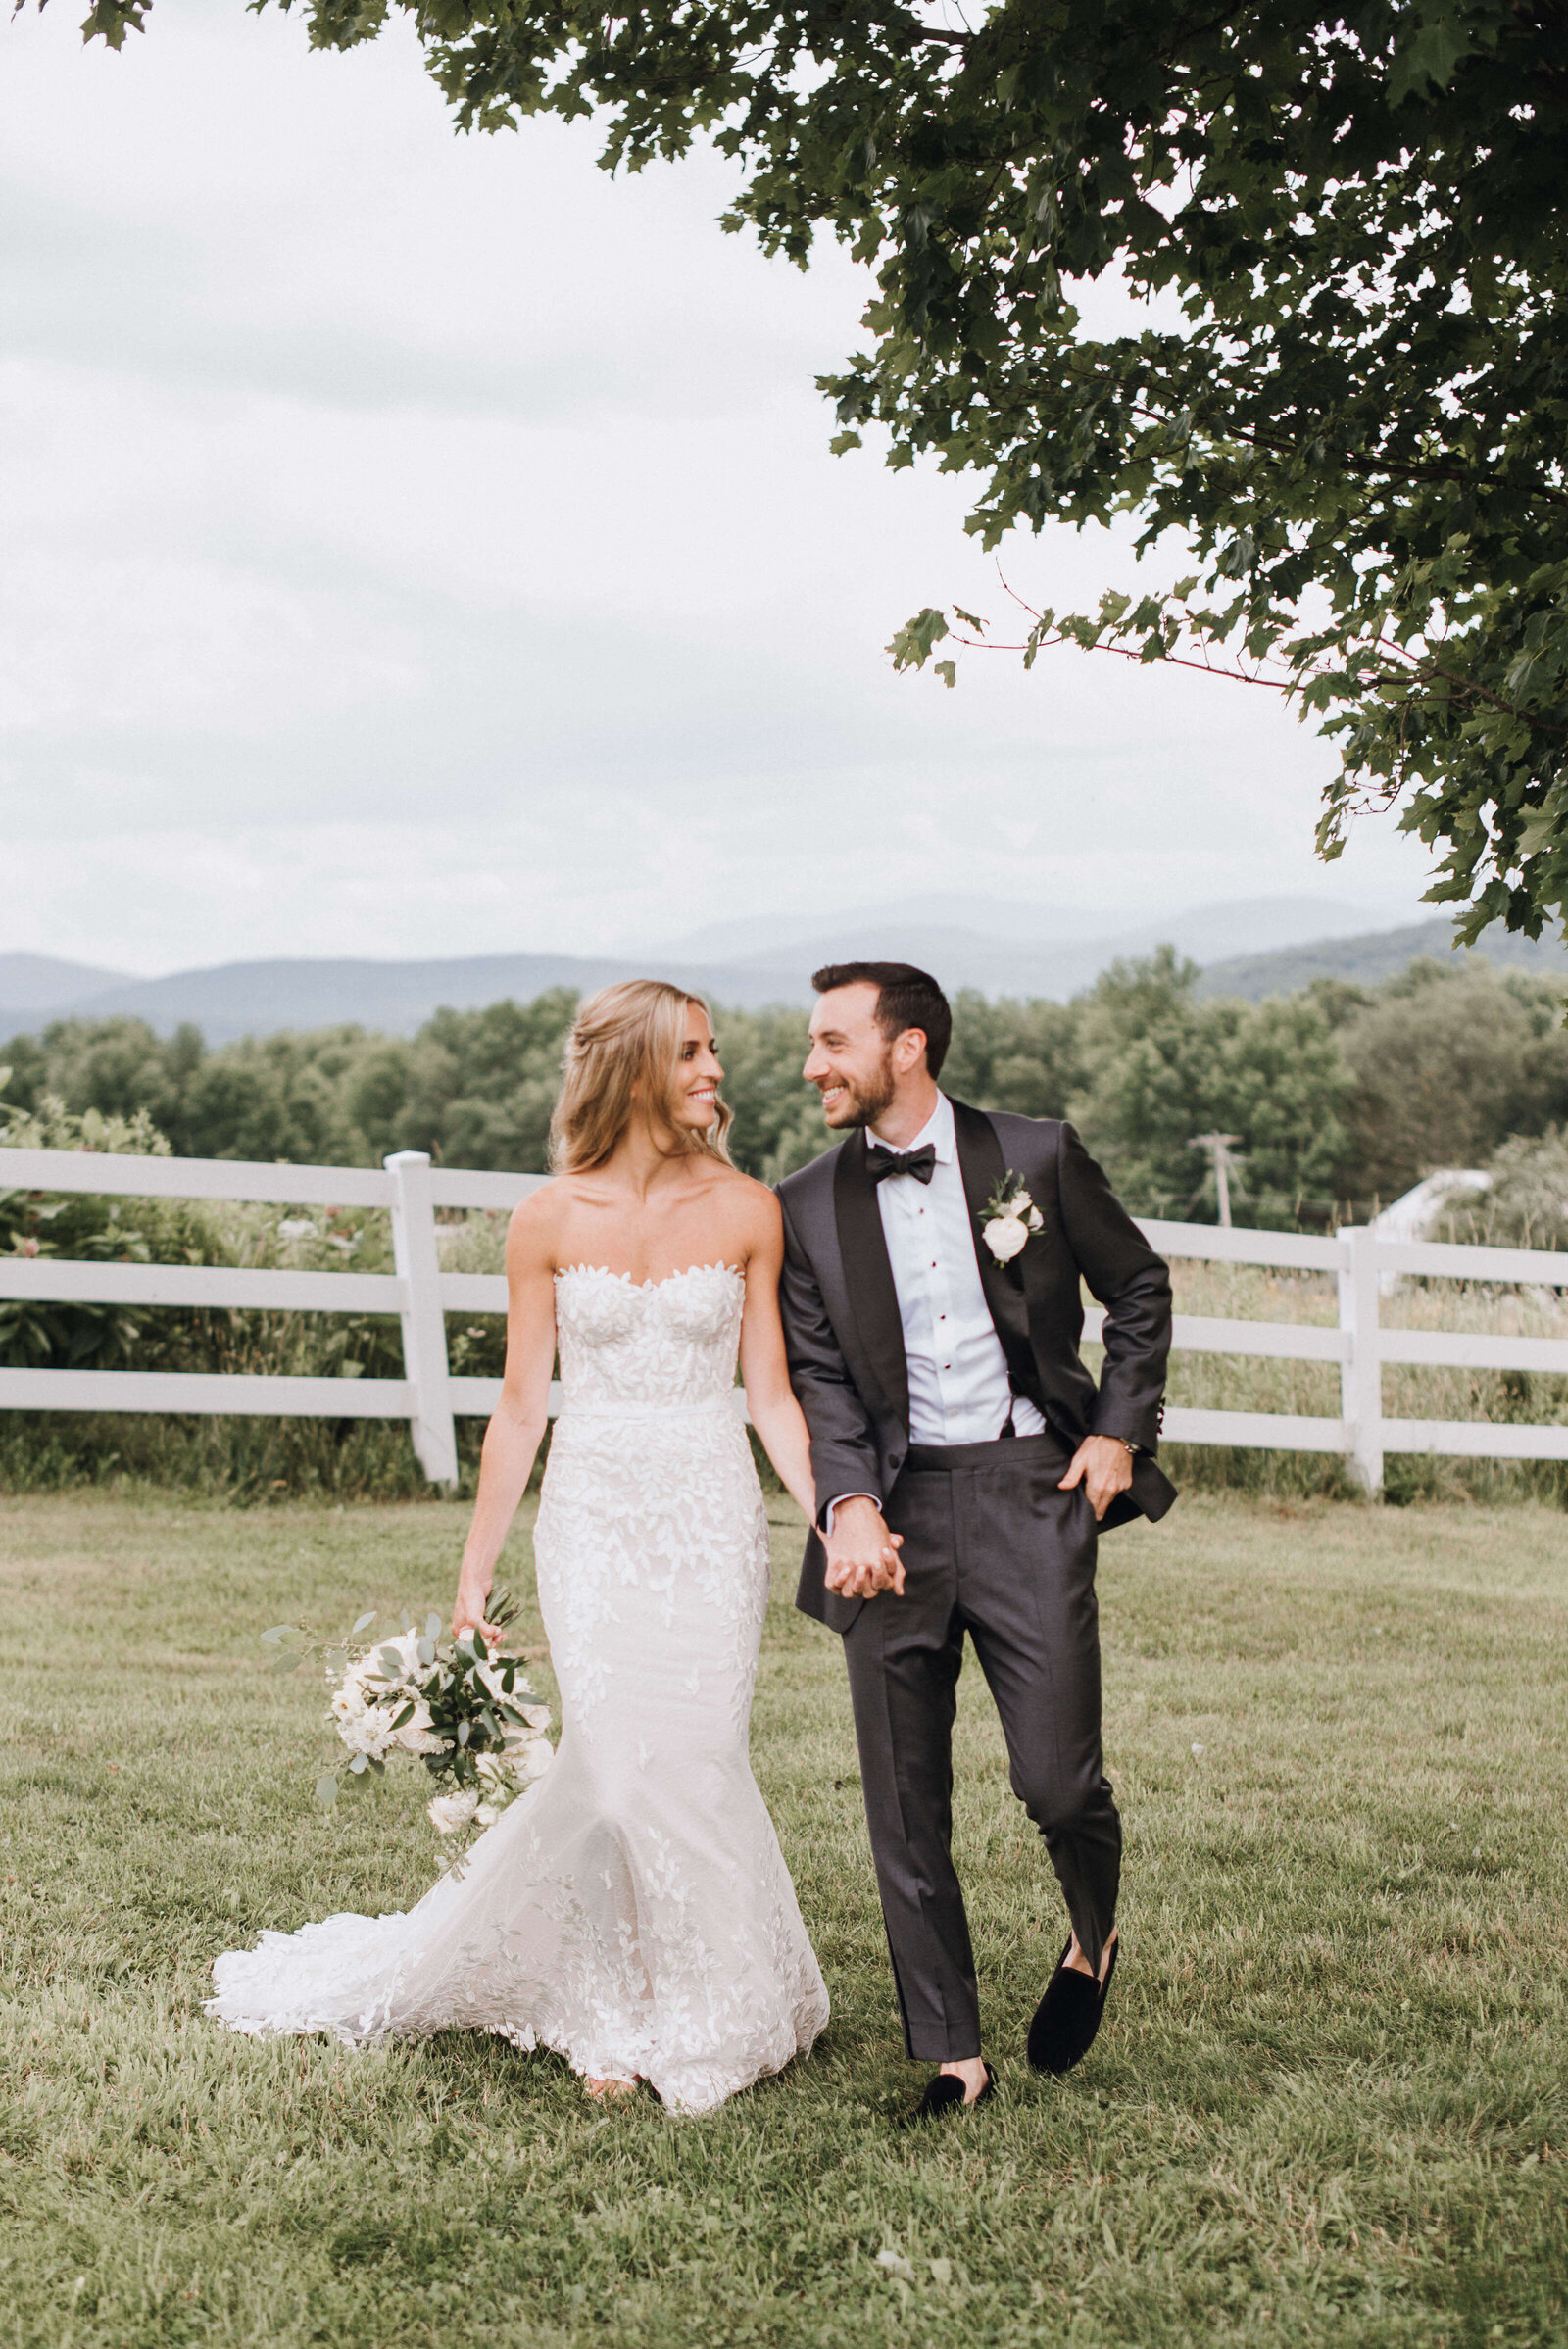 A bride and groom in a tuxedo  walking hand-in-hand on a farm in the Catskills mountains